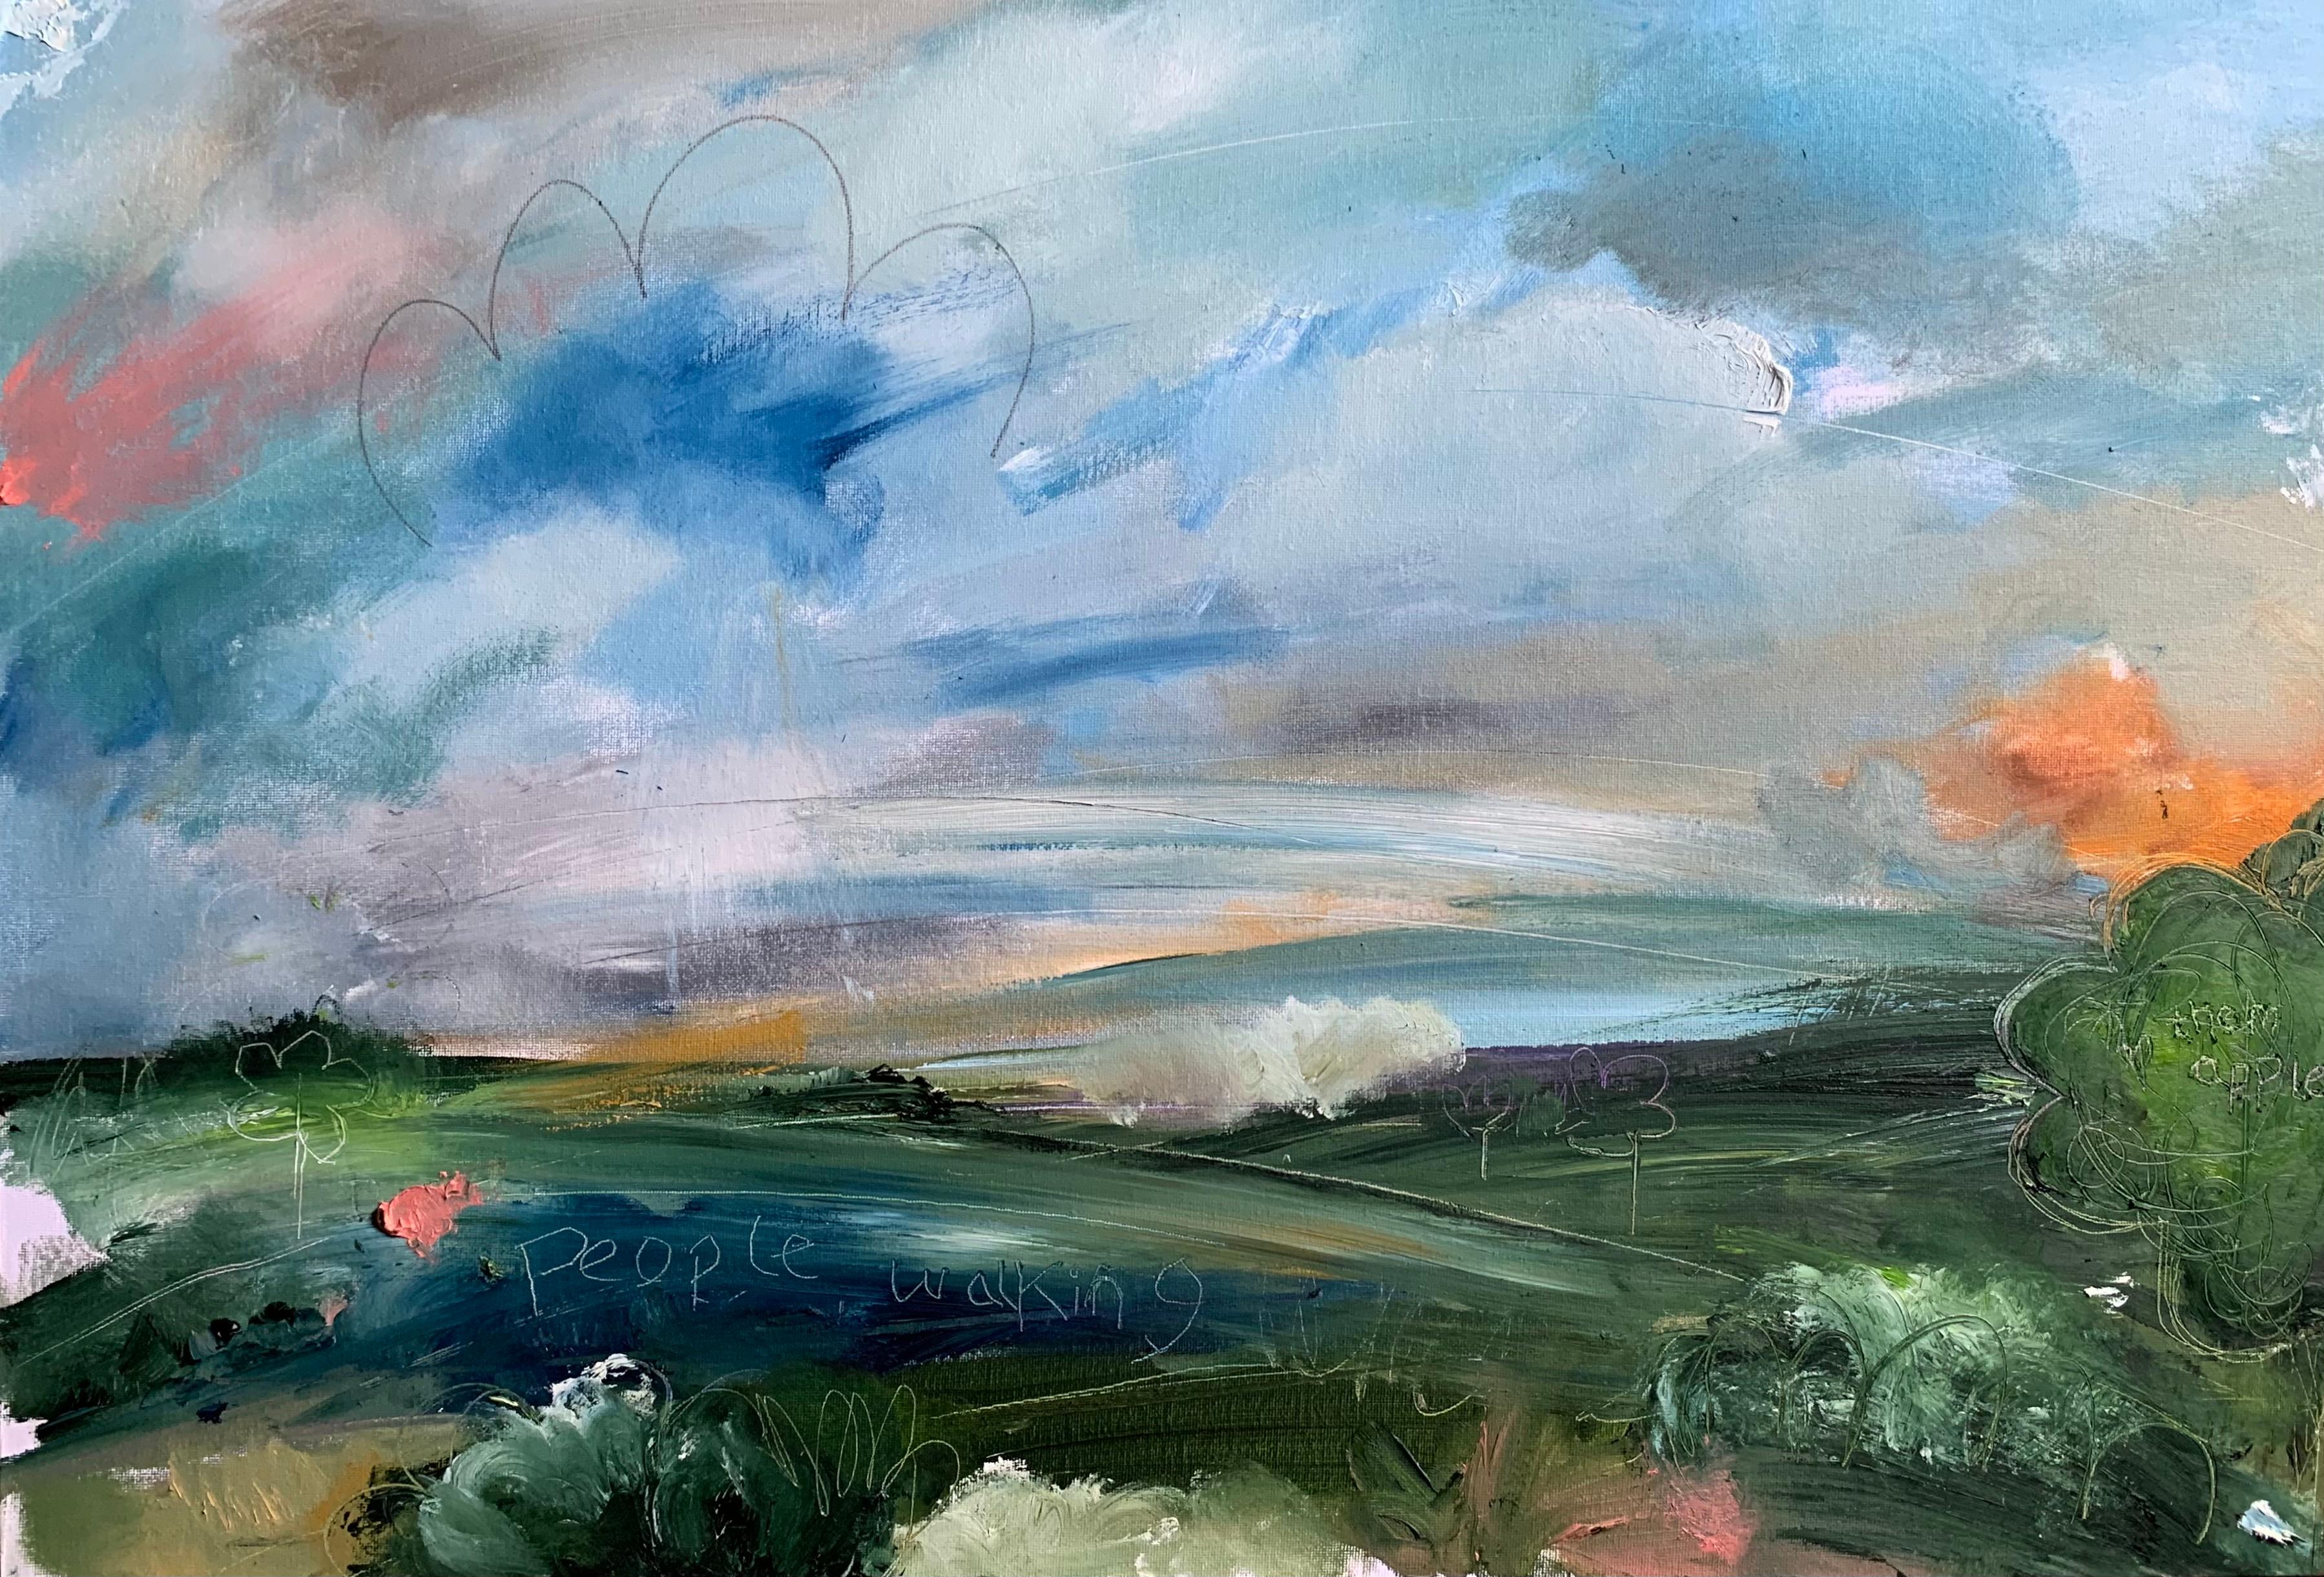 Shame there isn't a Cornershop to buy some Pop in it - landscape oil painting